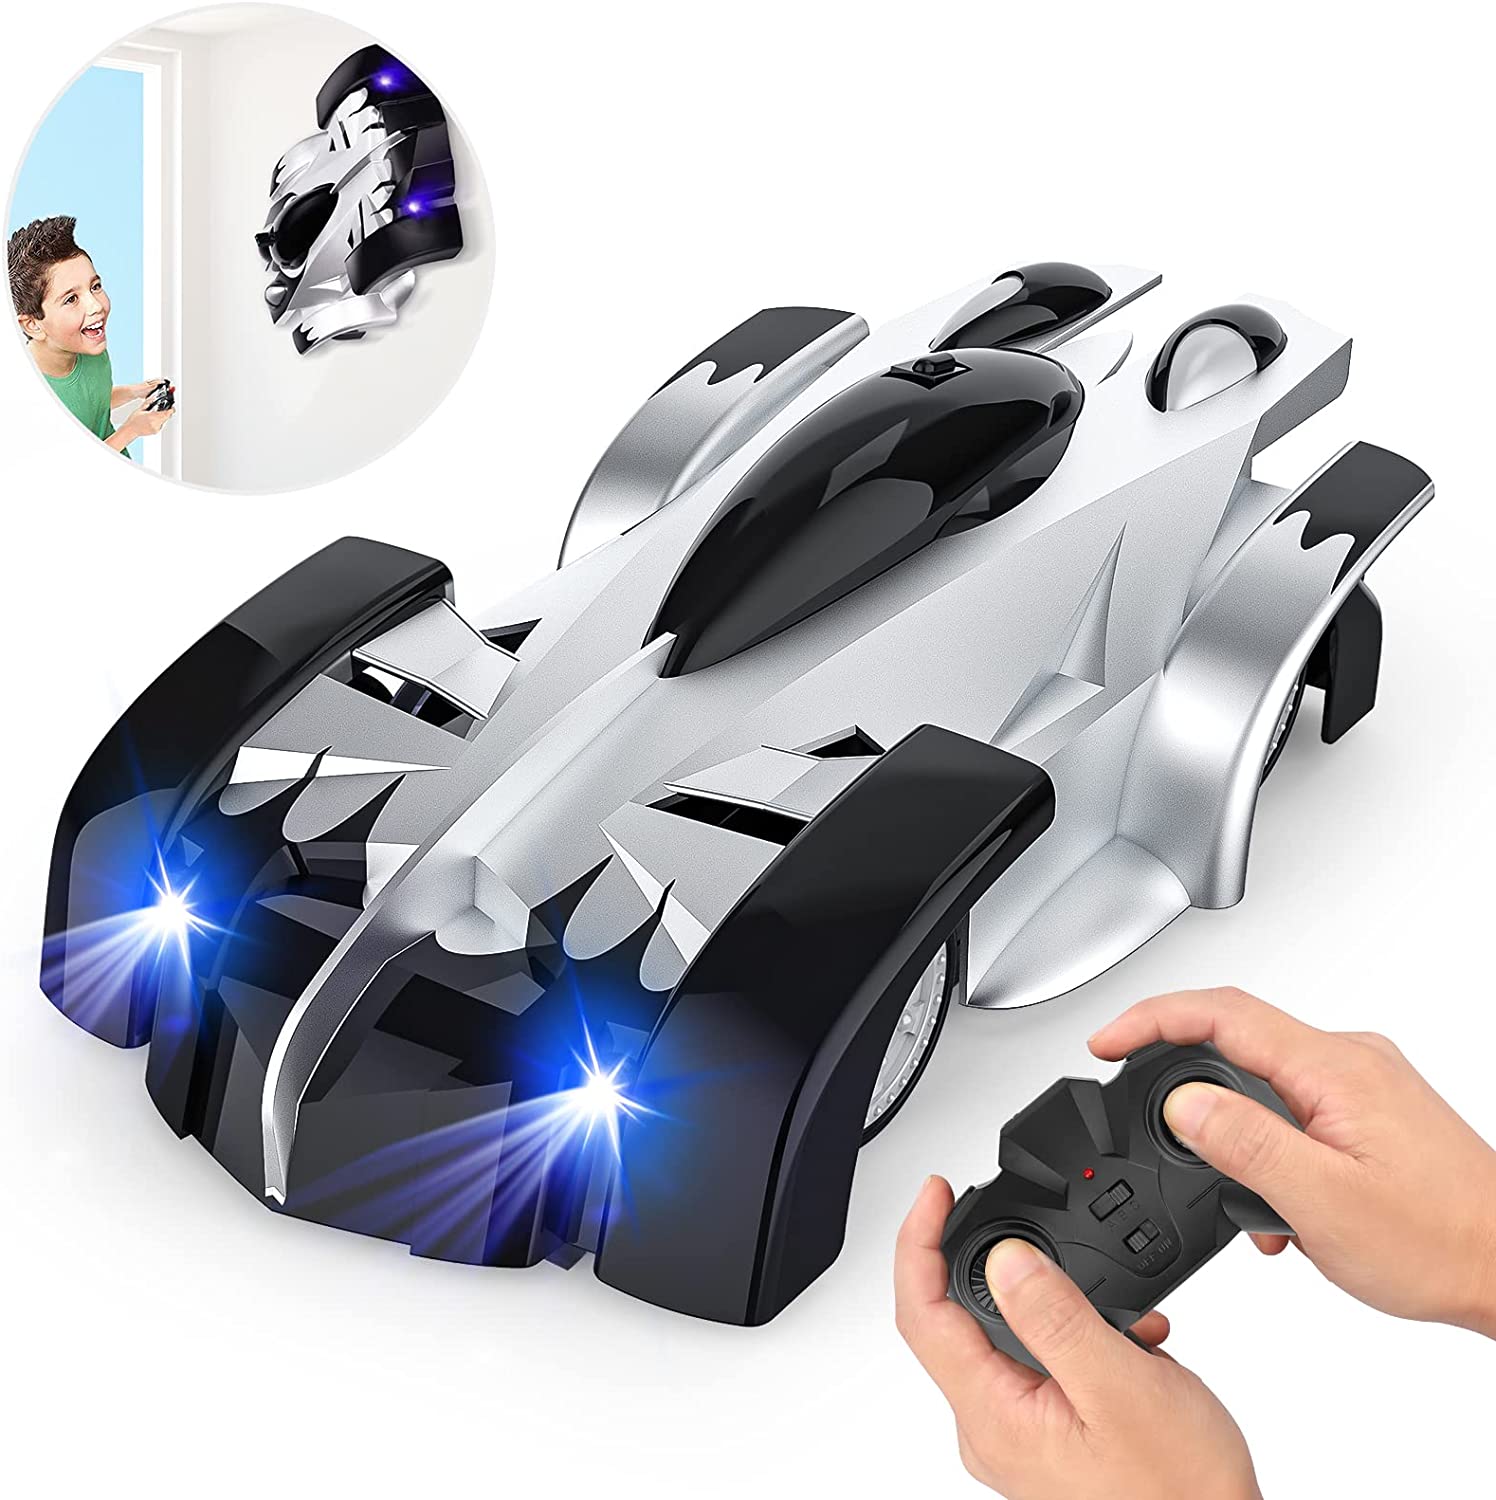 EpochAir Remote Control Car for Boys - Wall Climbing Cars Rechargeable Stunt RC Car Transform Toys High Speed Vehicle with Dual Mode 360 Rotating Gift for 3 4 5 6 7 8 Year Old Kids UPC:745681767001